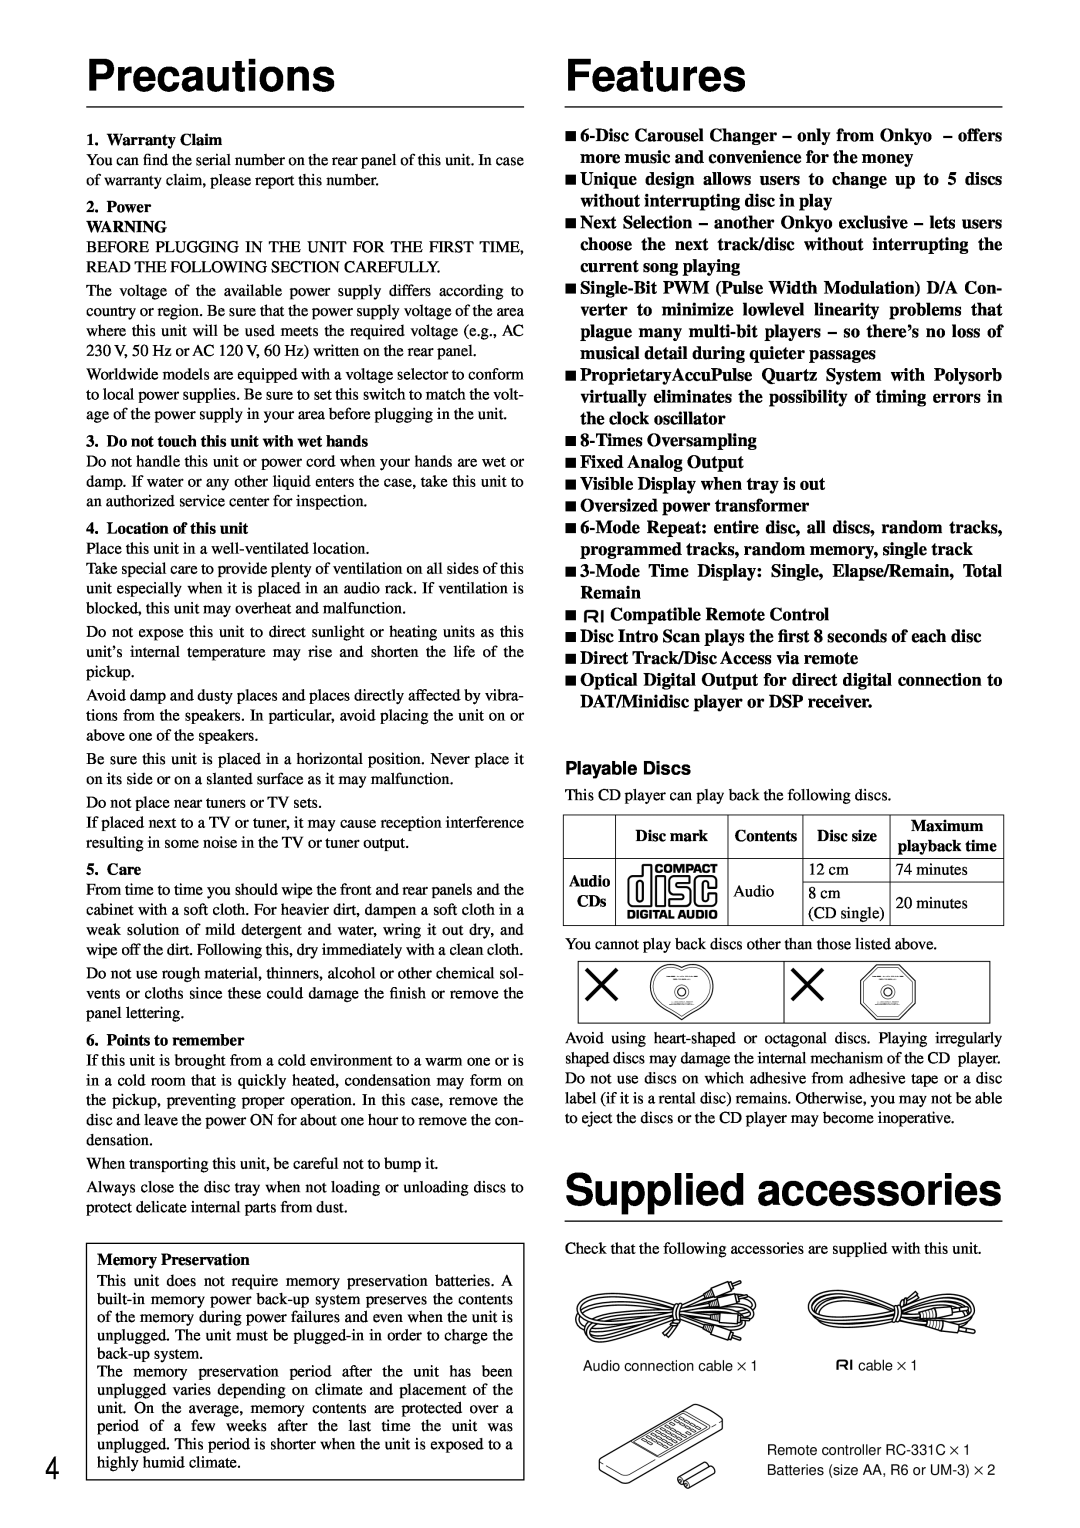 Onkyo DX-C370 instruction manual Features, Supplied accessories, Playable Discs, Precautions 